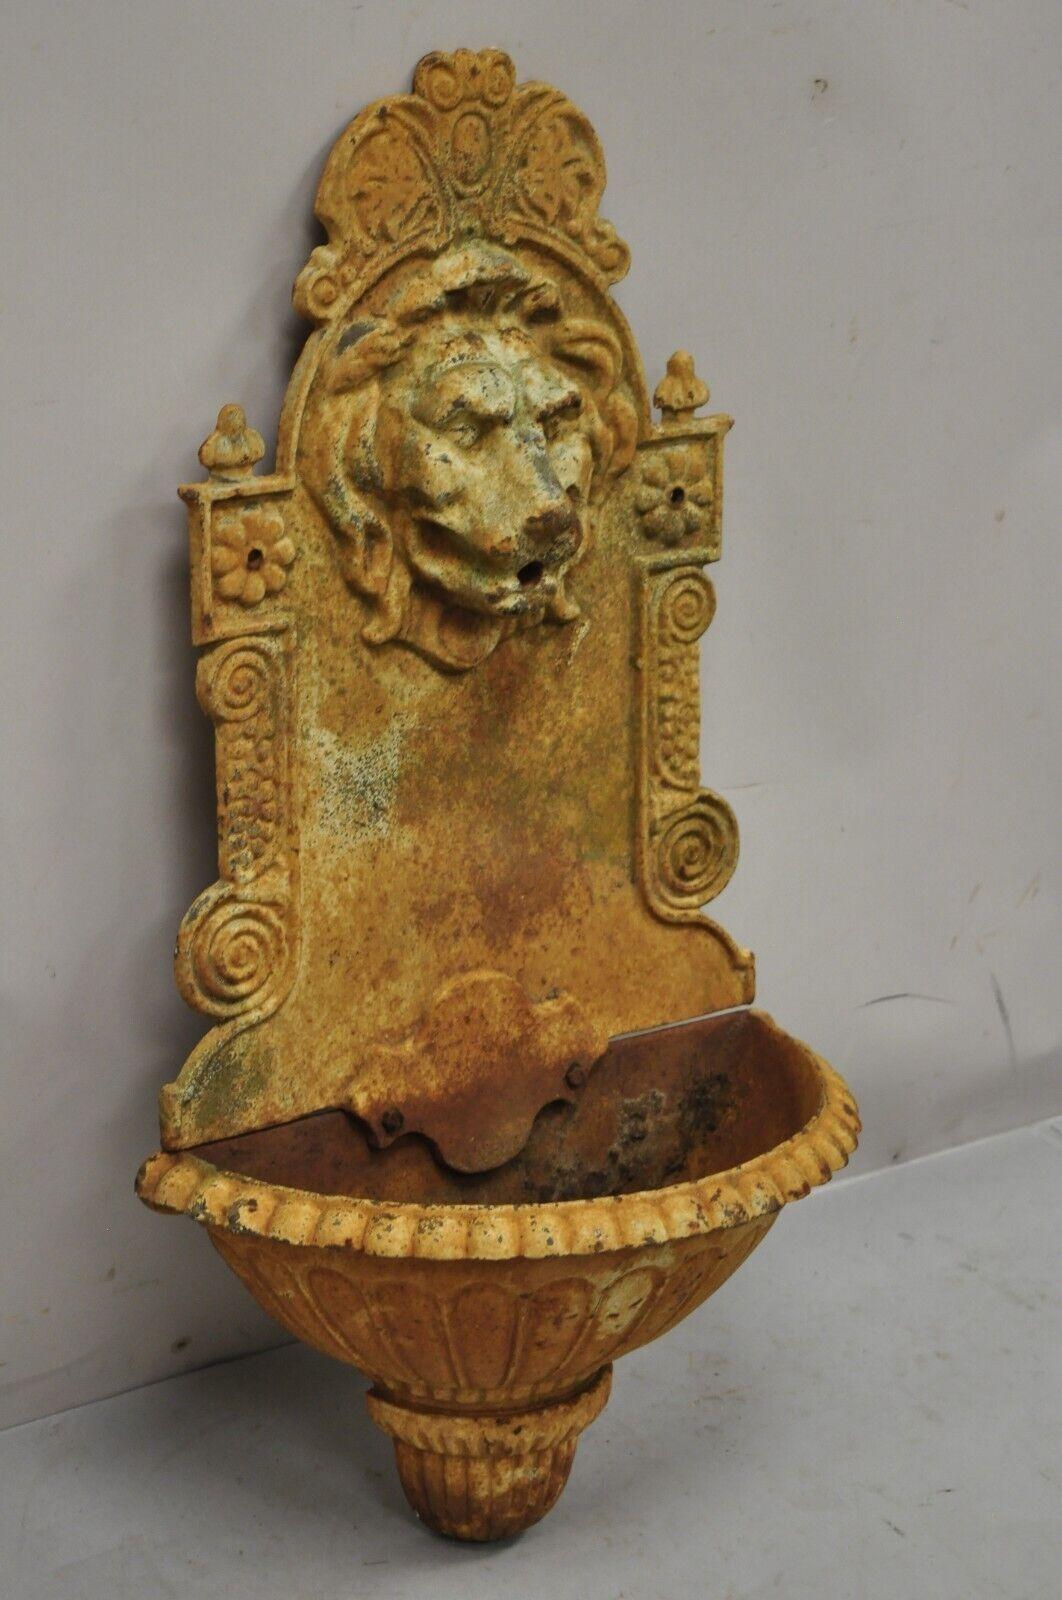 Cast Iron French Empire Style Lion Head Outdoor Garden Wall Water Fountain (Black). Item features heavy cast iron construction, desirable weathered patina, approx. 40 lbs each. Does not include mounting hardware or water pump service. Circa Late